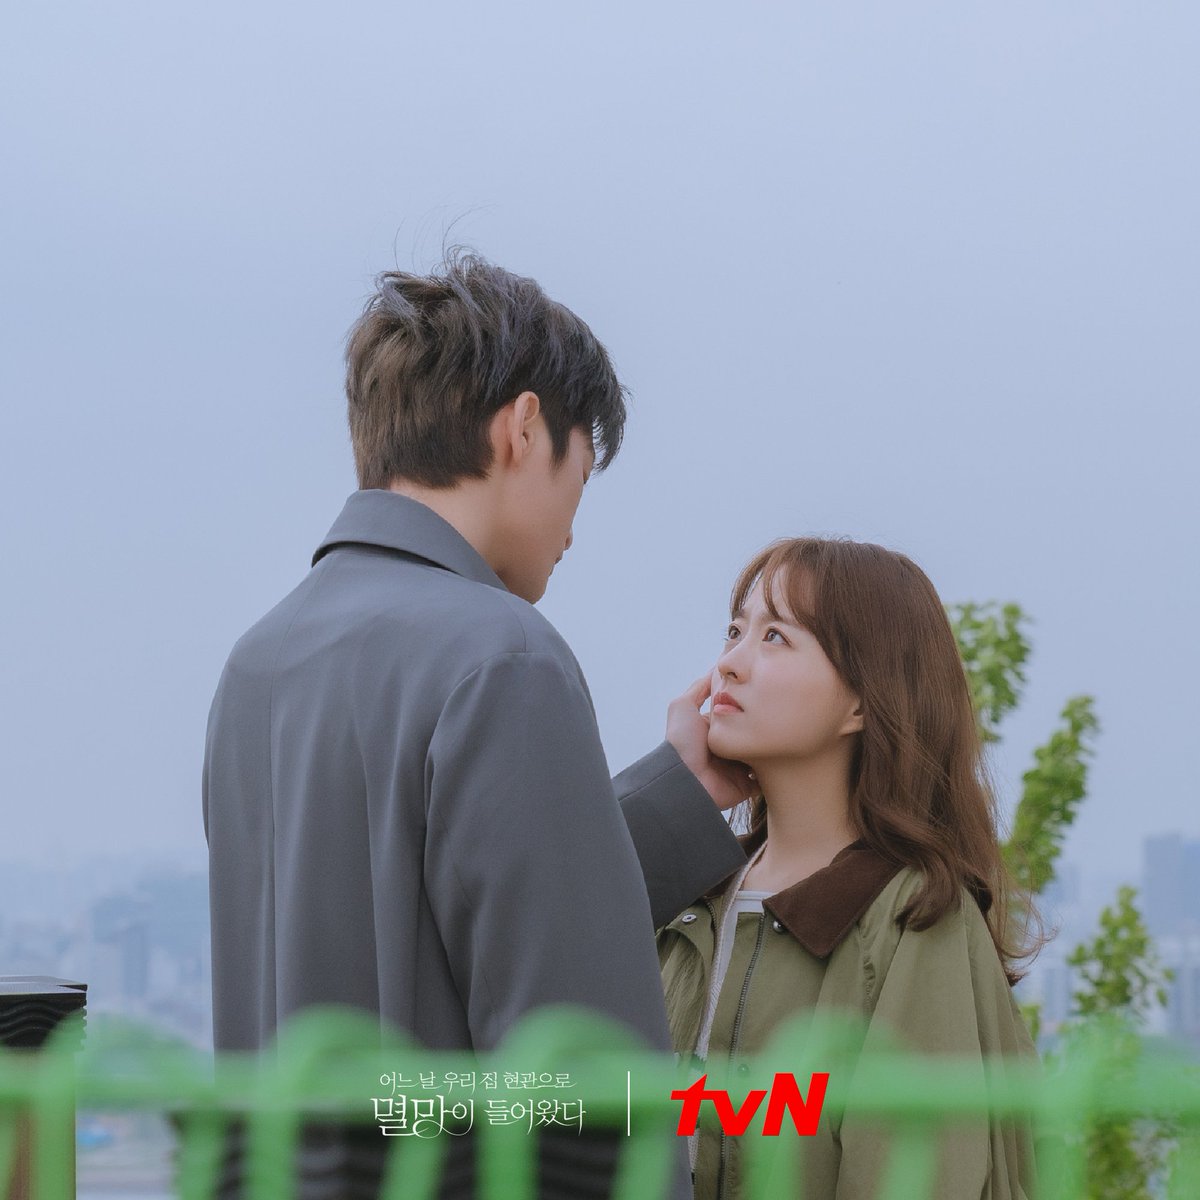 Ult fave scene in days ❤️‍🔥❤️‍🩹 the feeling the setting the whole purpose of this the ost, felt so heavy and deep #SeoInGuk #ParkBoYoung